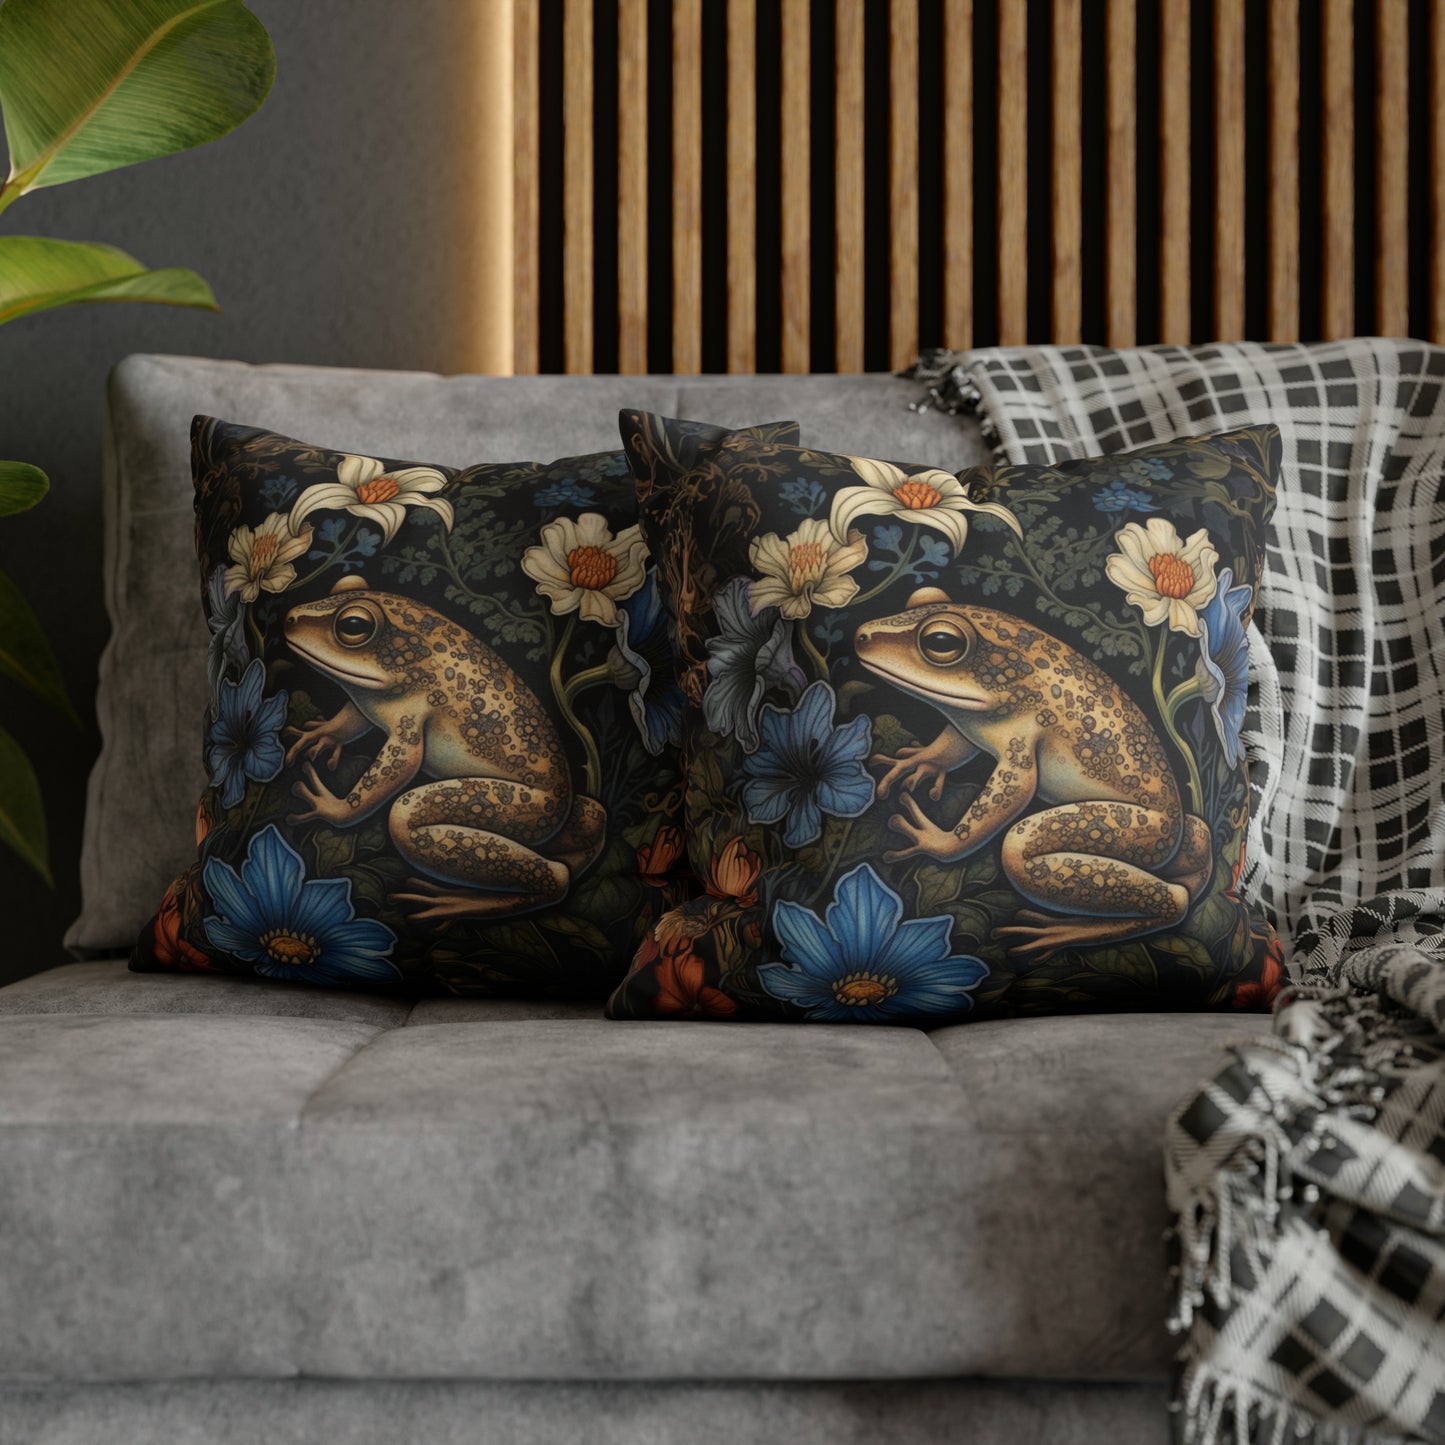 Floral Frog Pillow William Morris Inspired